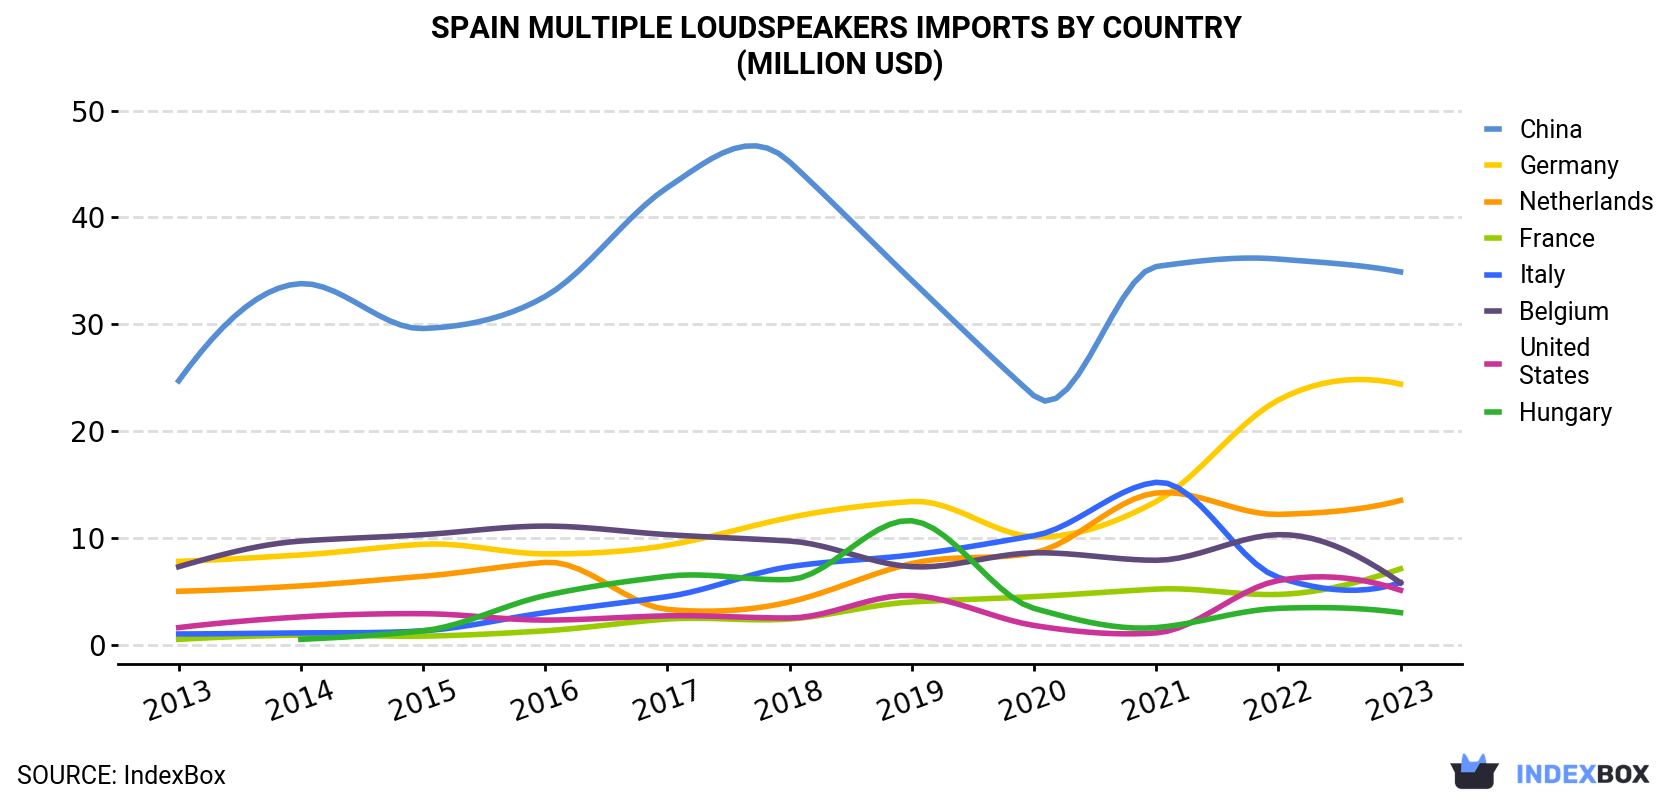 Spain Multiple Loudspeakers Imports By Country (Million USD)